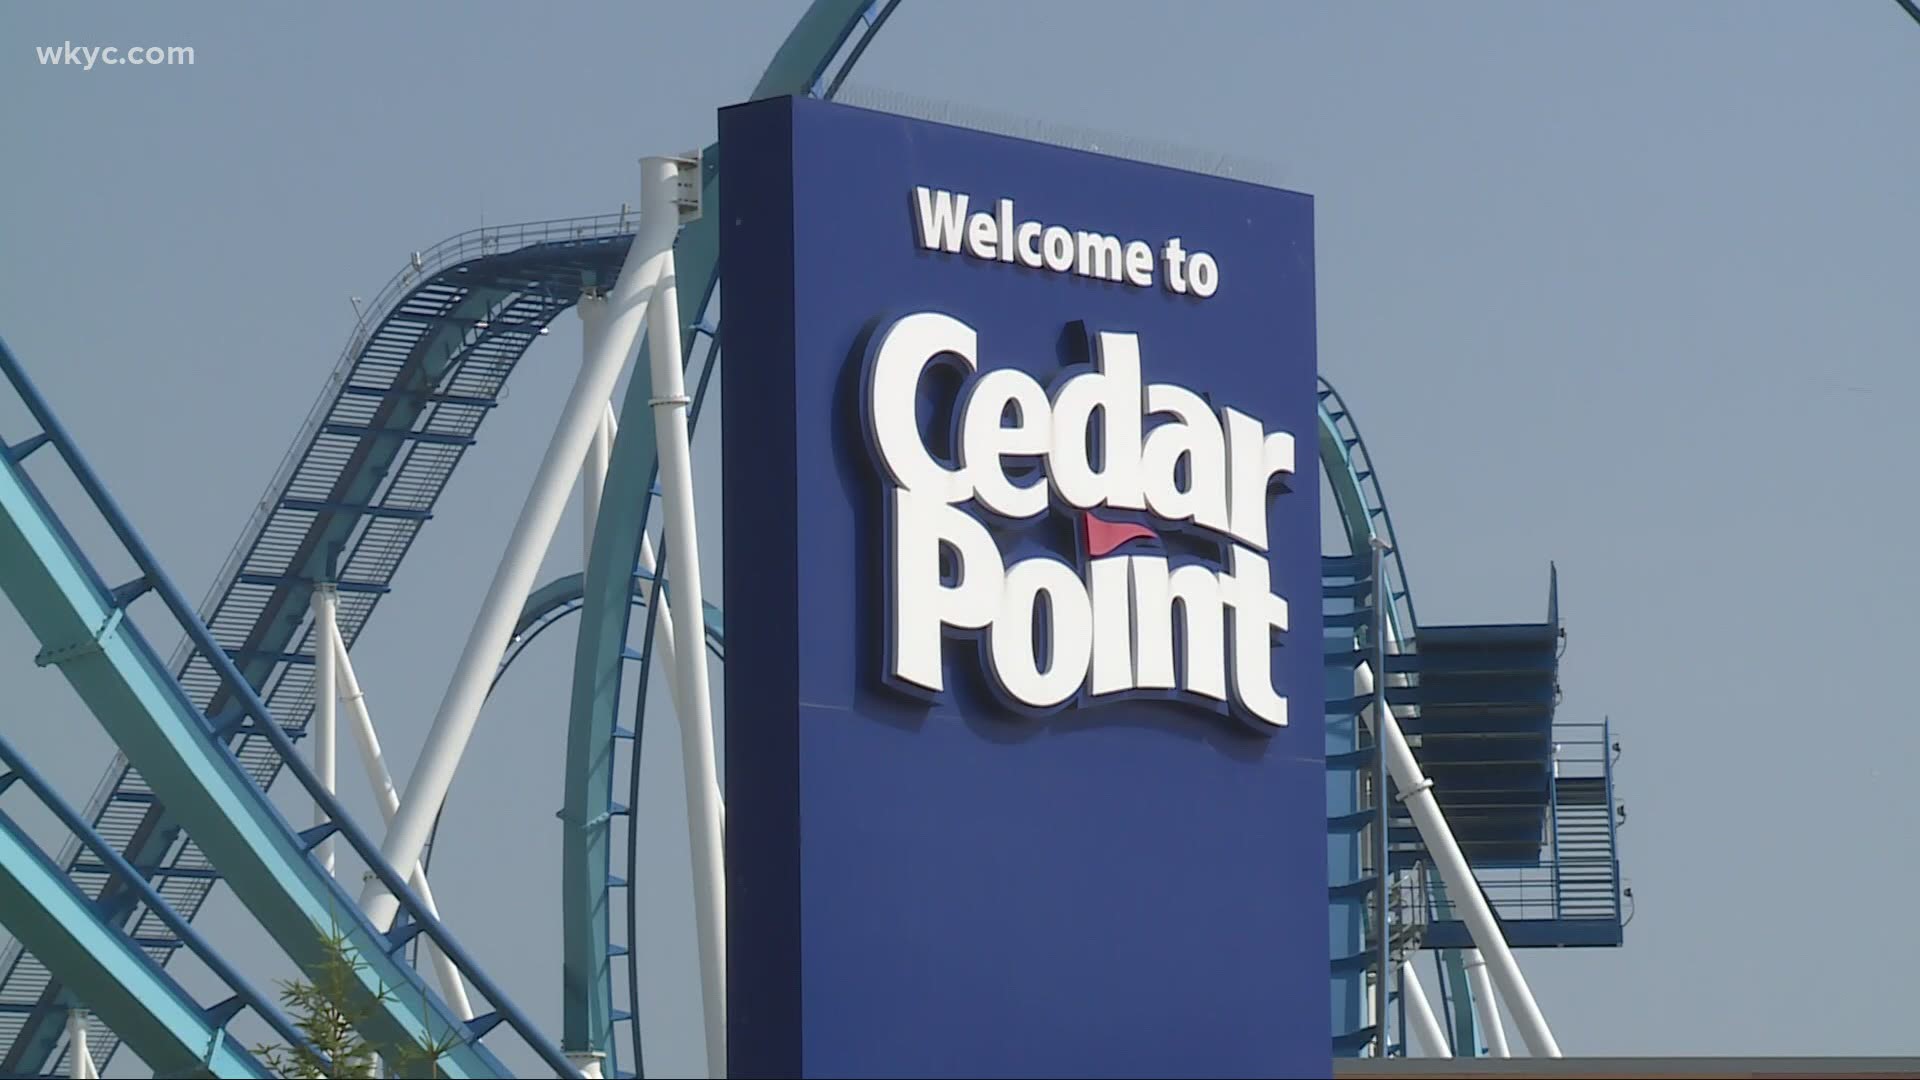 Cedar Point is back open! The park is open from 11 to 8 every day with season pass holders the first to be allowed back in.